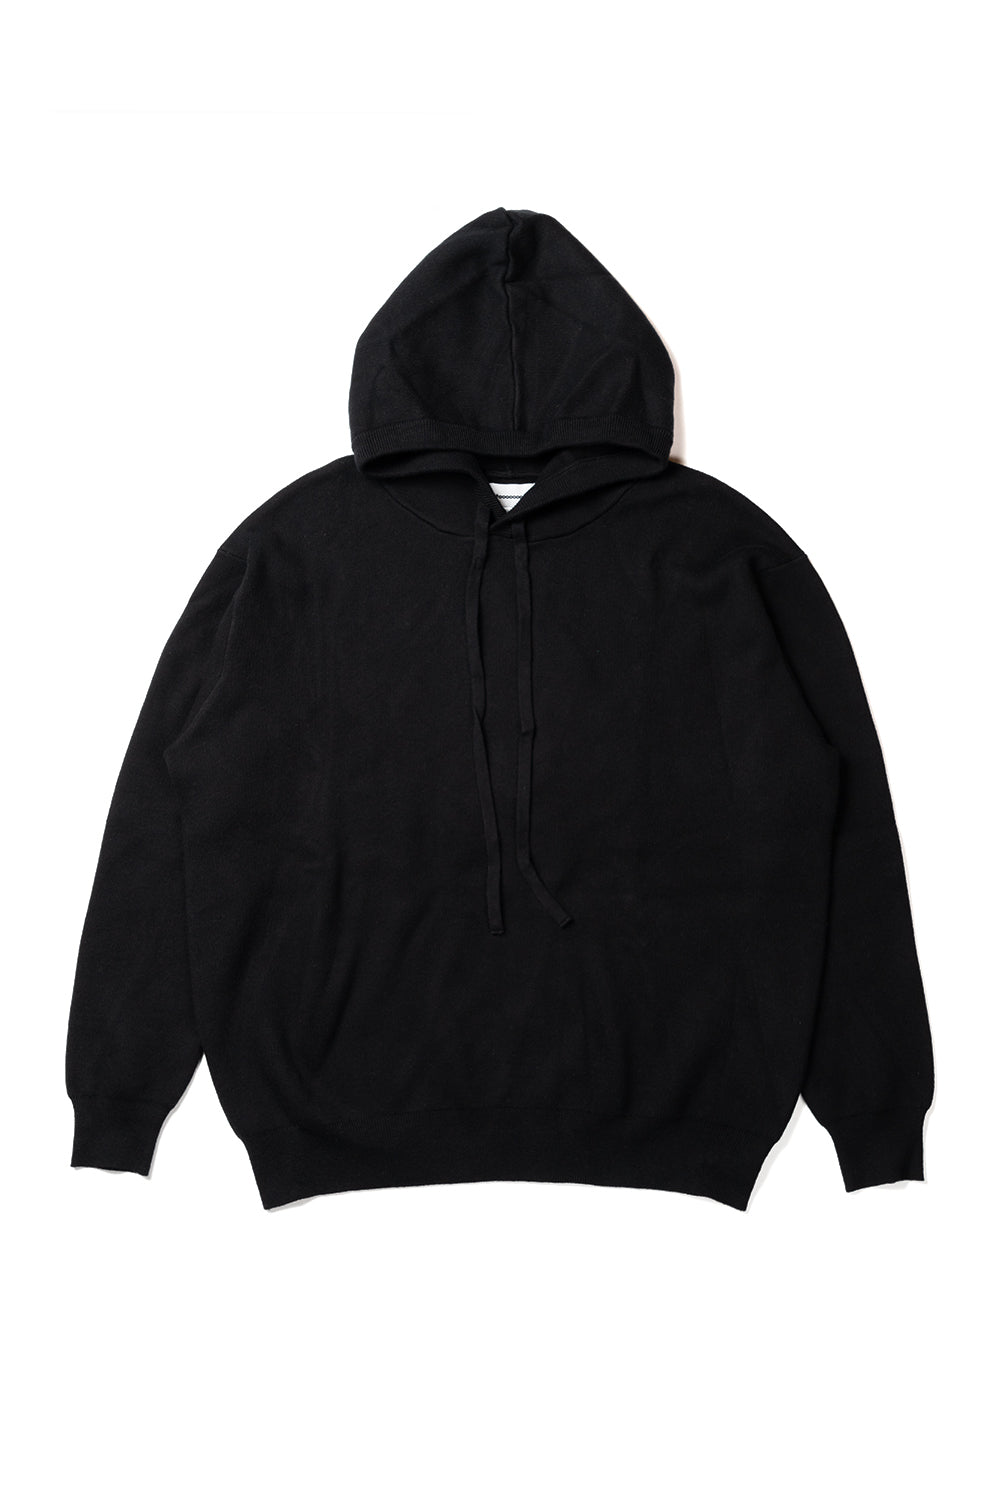 12G smouth knit hoodie